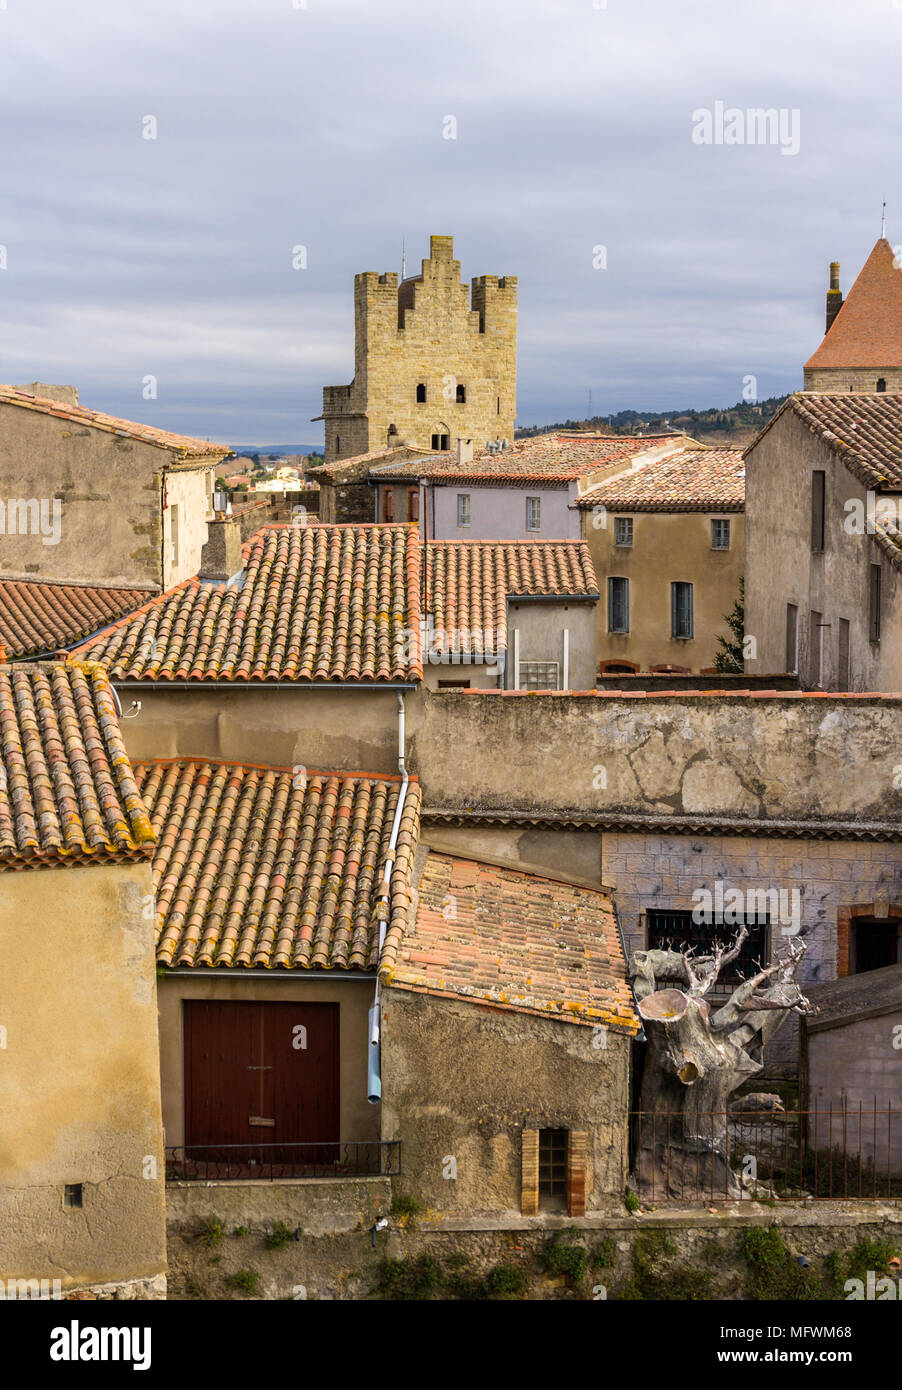 Inside Carcassonne fortified city - France Stock Photo